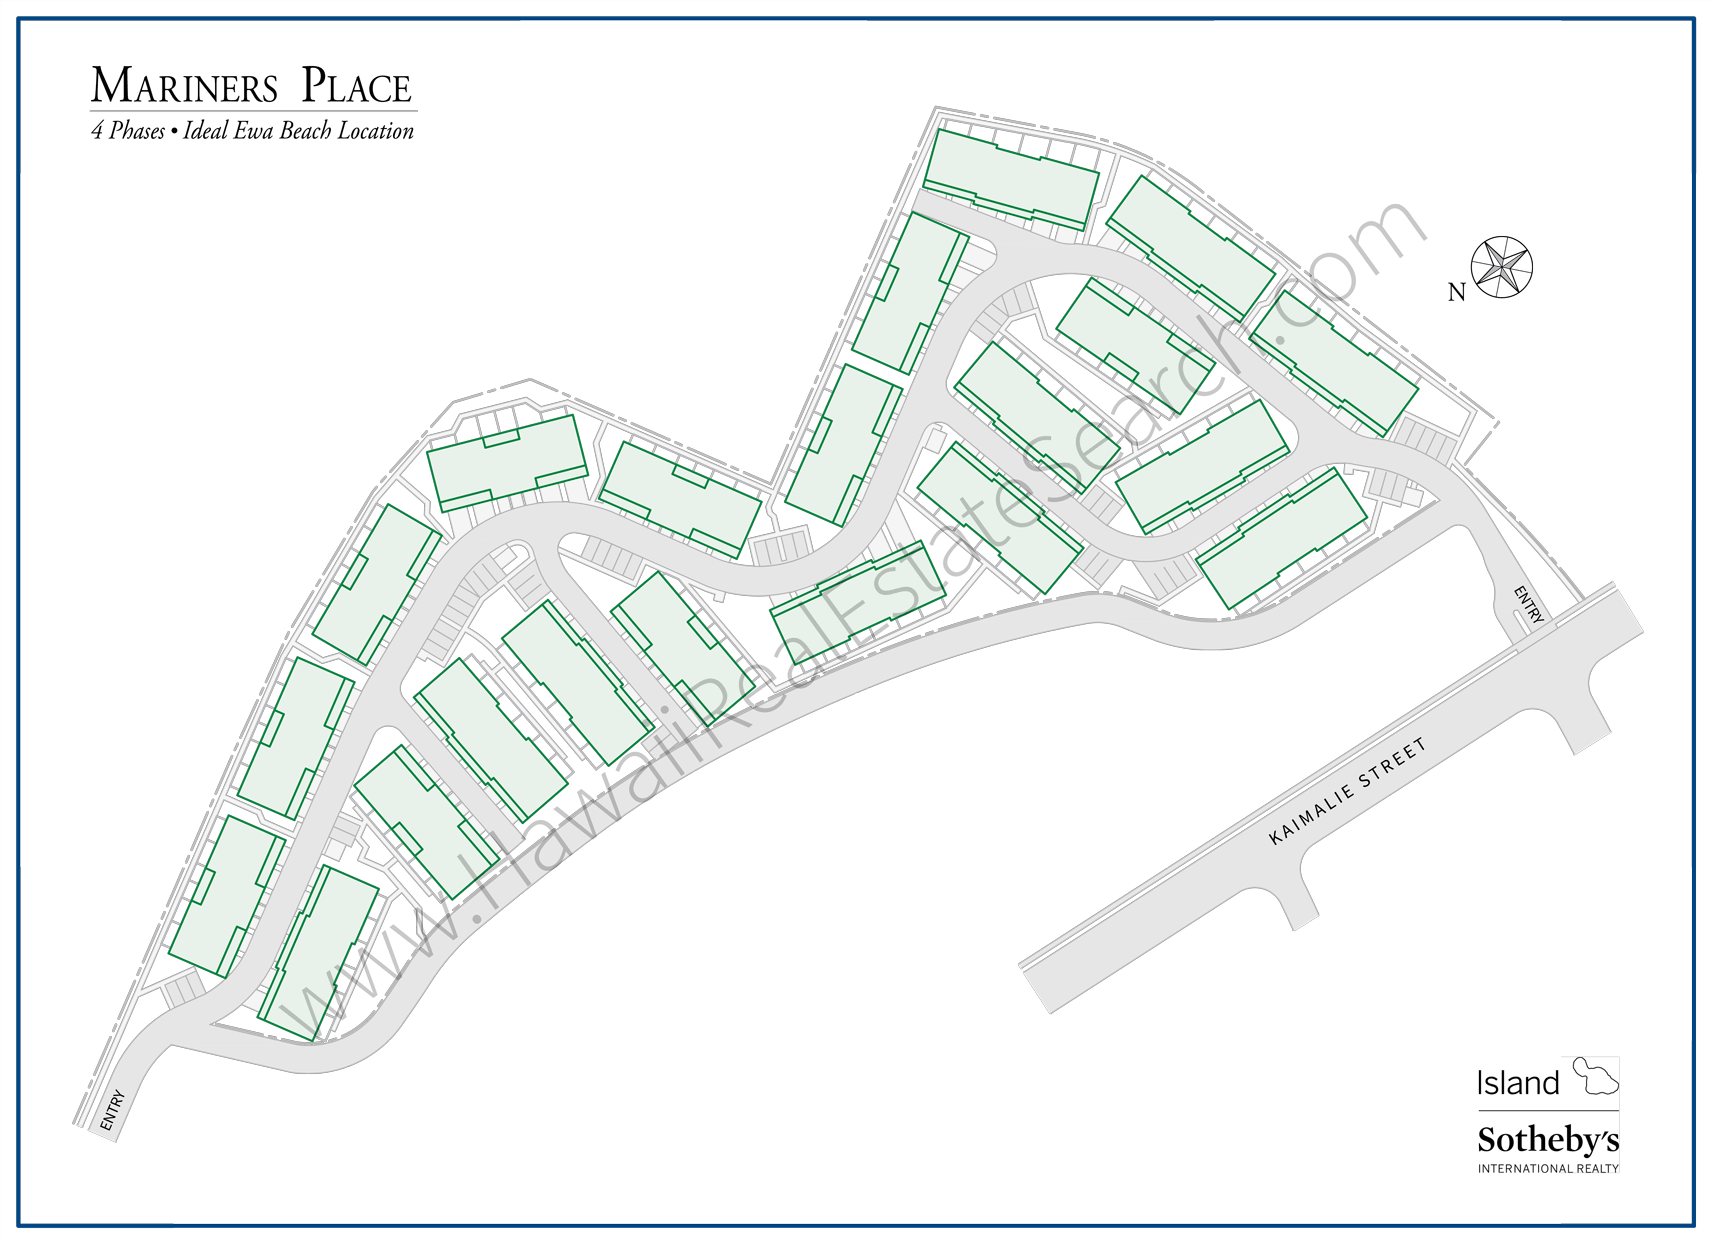 Mariners Place Map